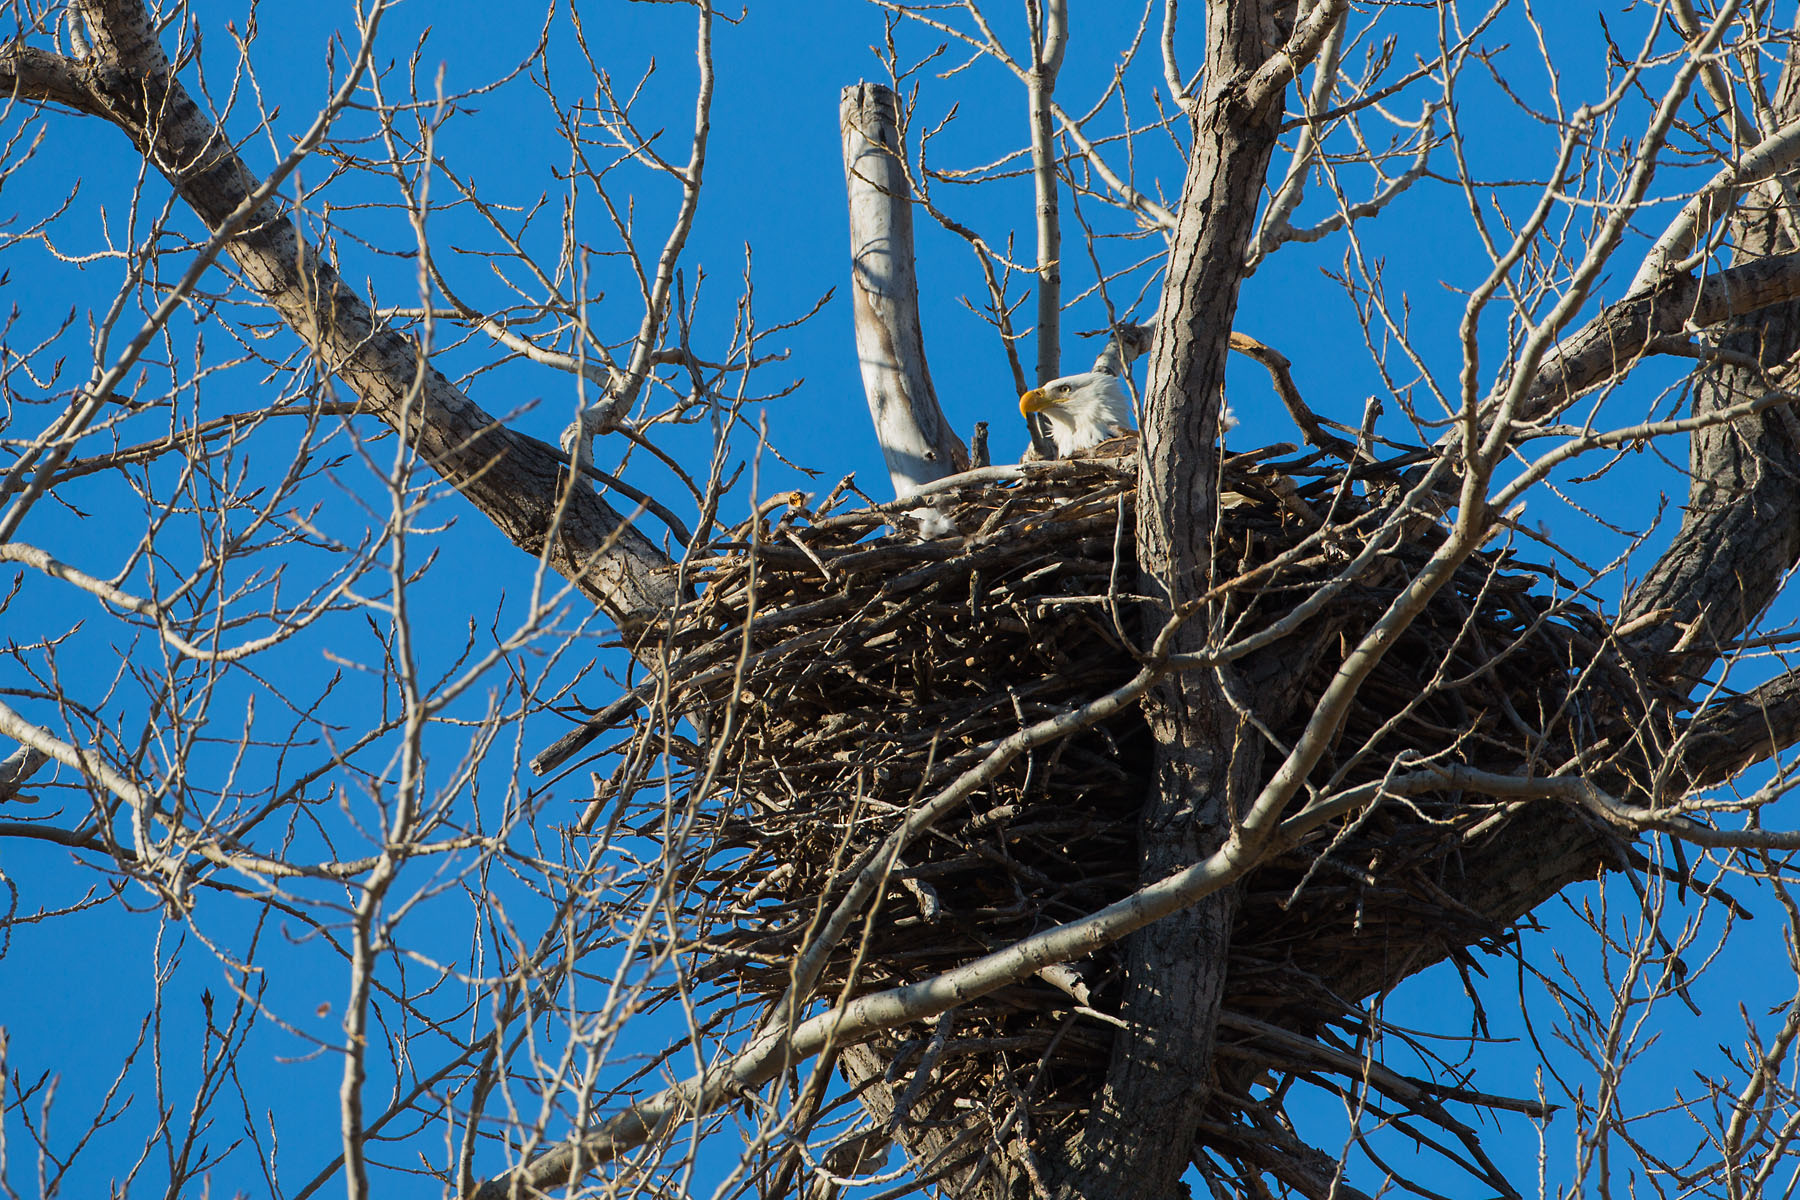 Bald Eagle in nest, Loess Bluffs NWR.  Click for next photo.